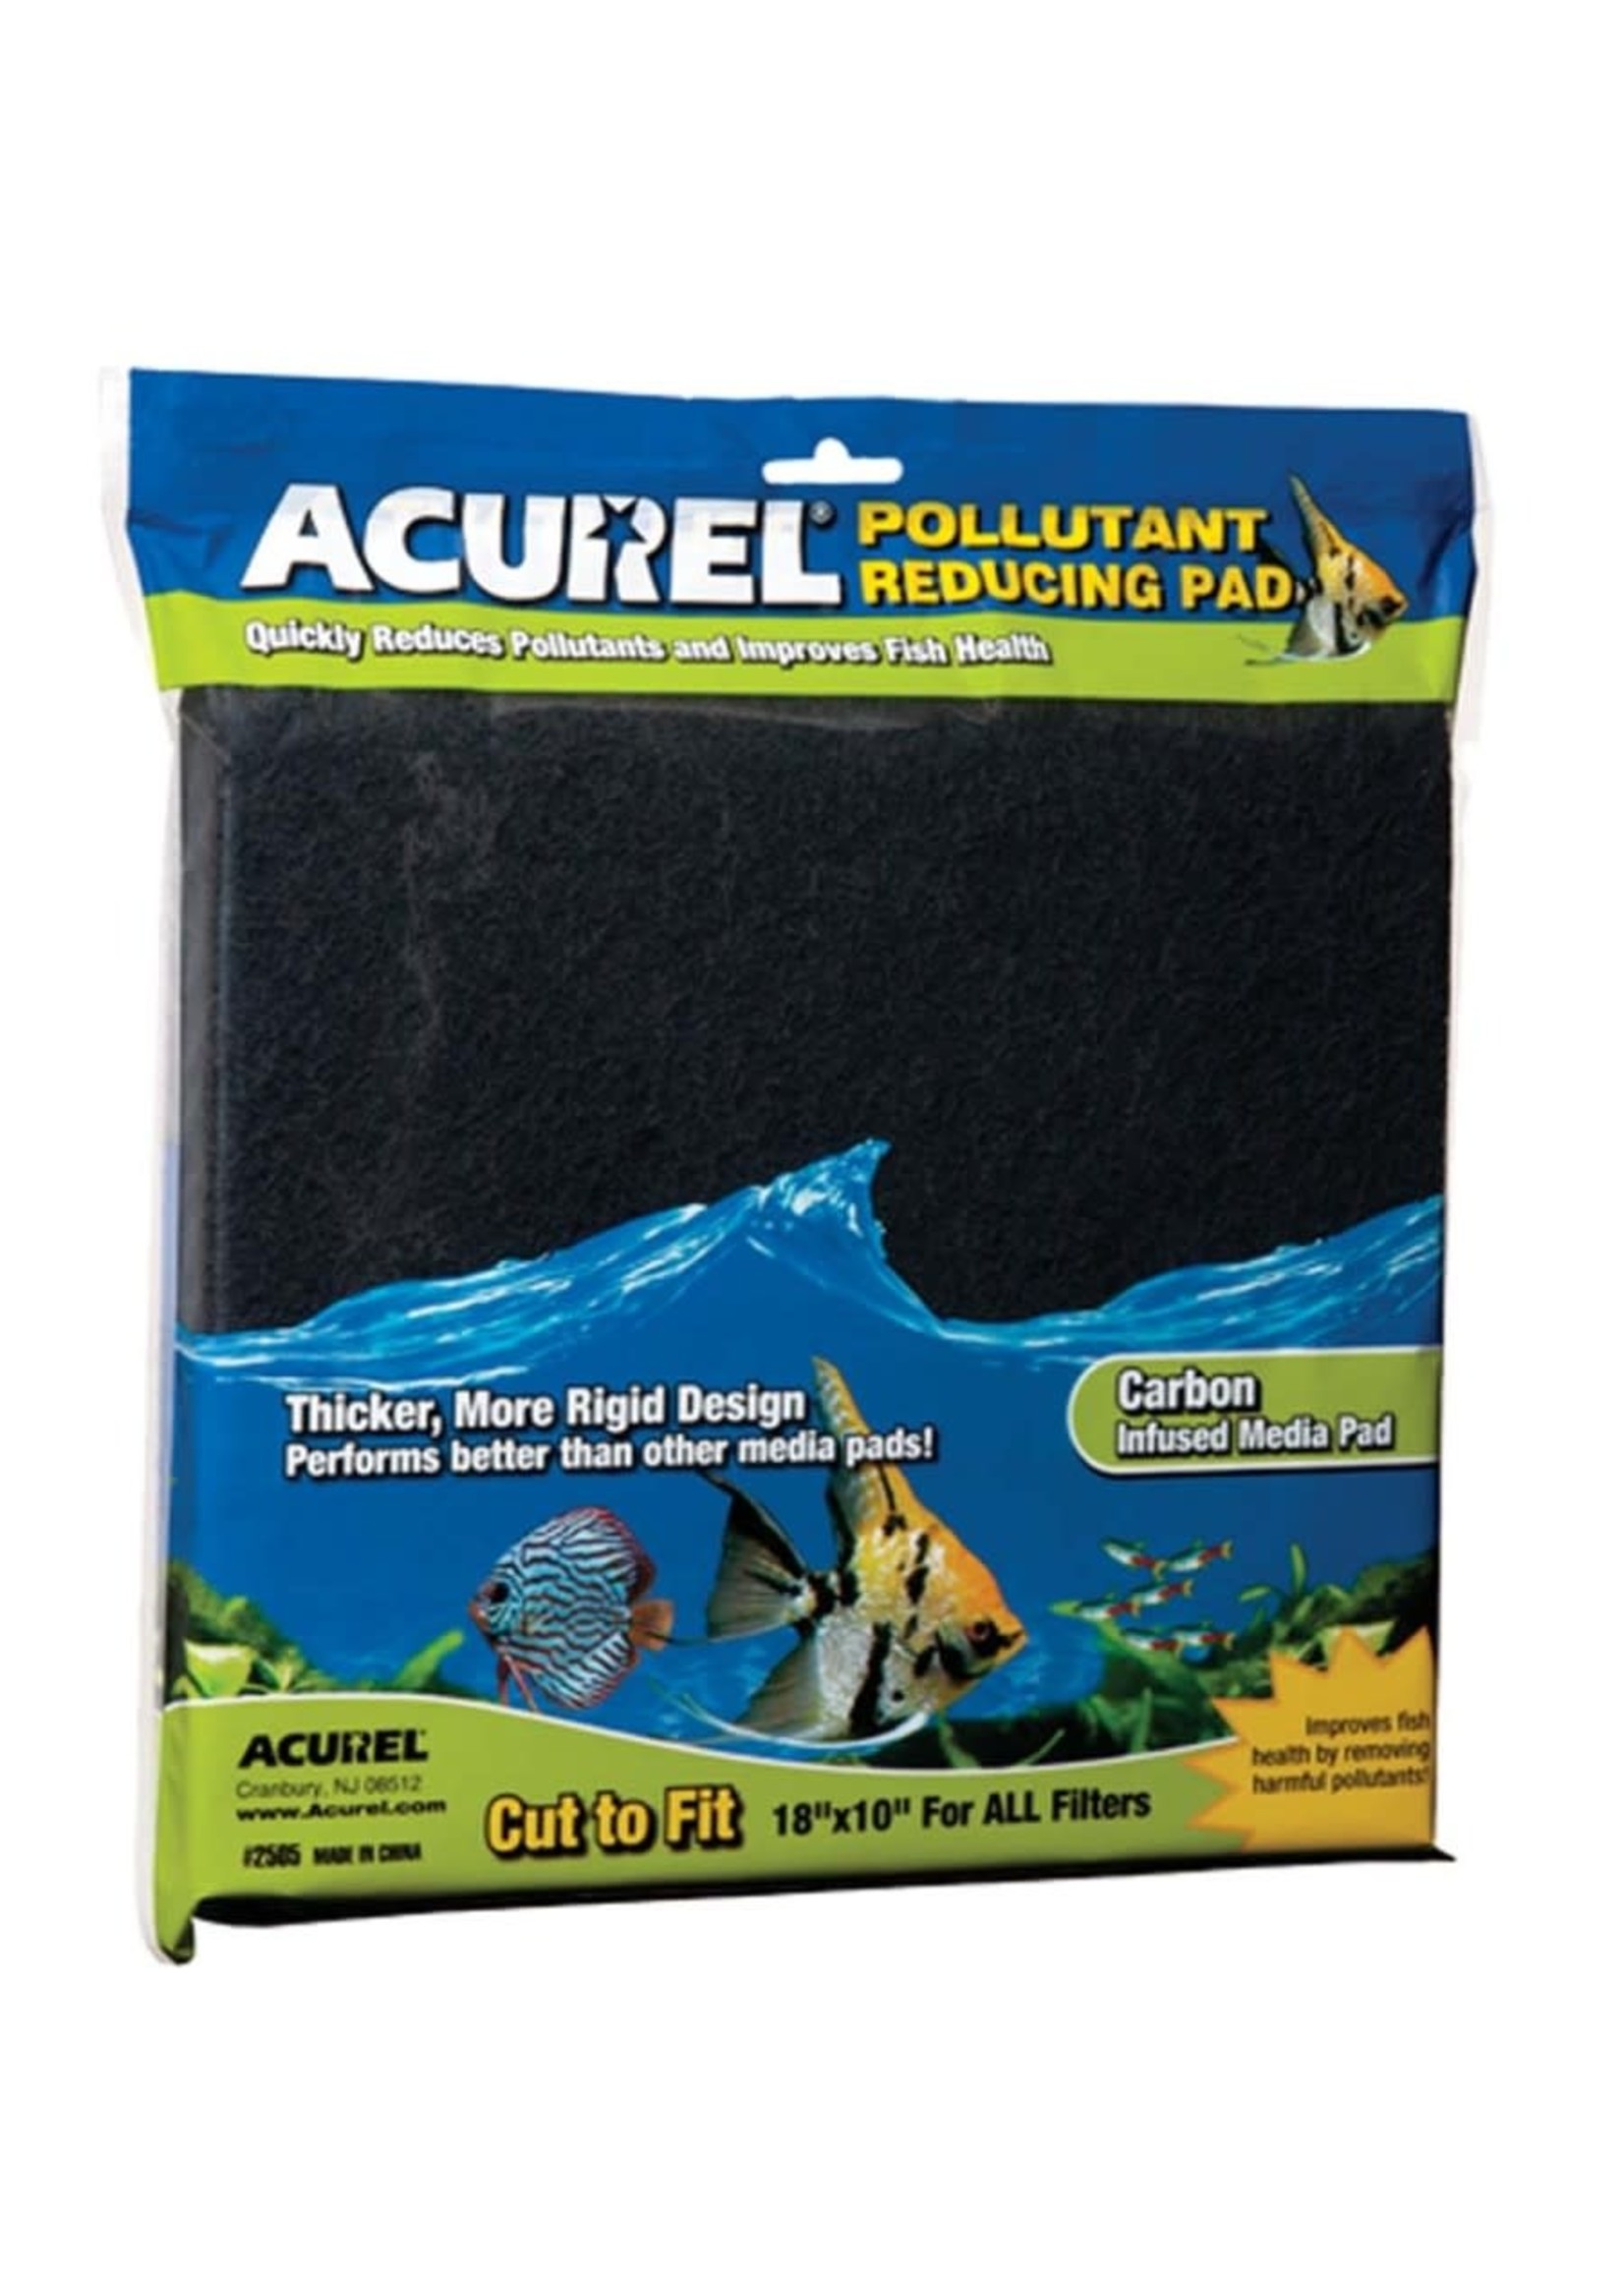 Acurel PAD CUT TO FIT CARBON